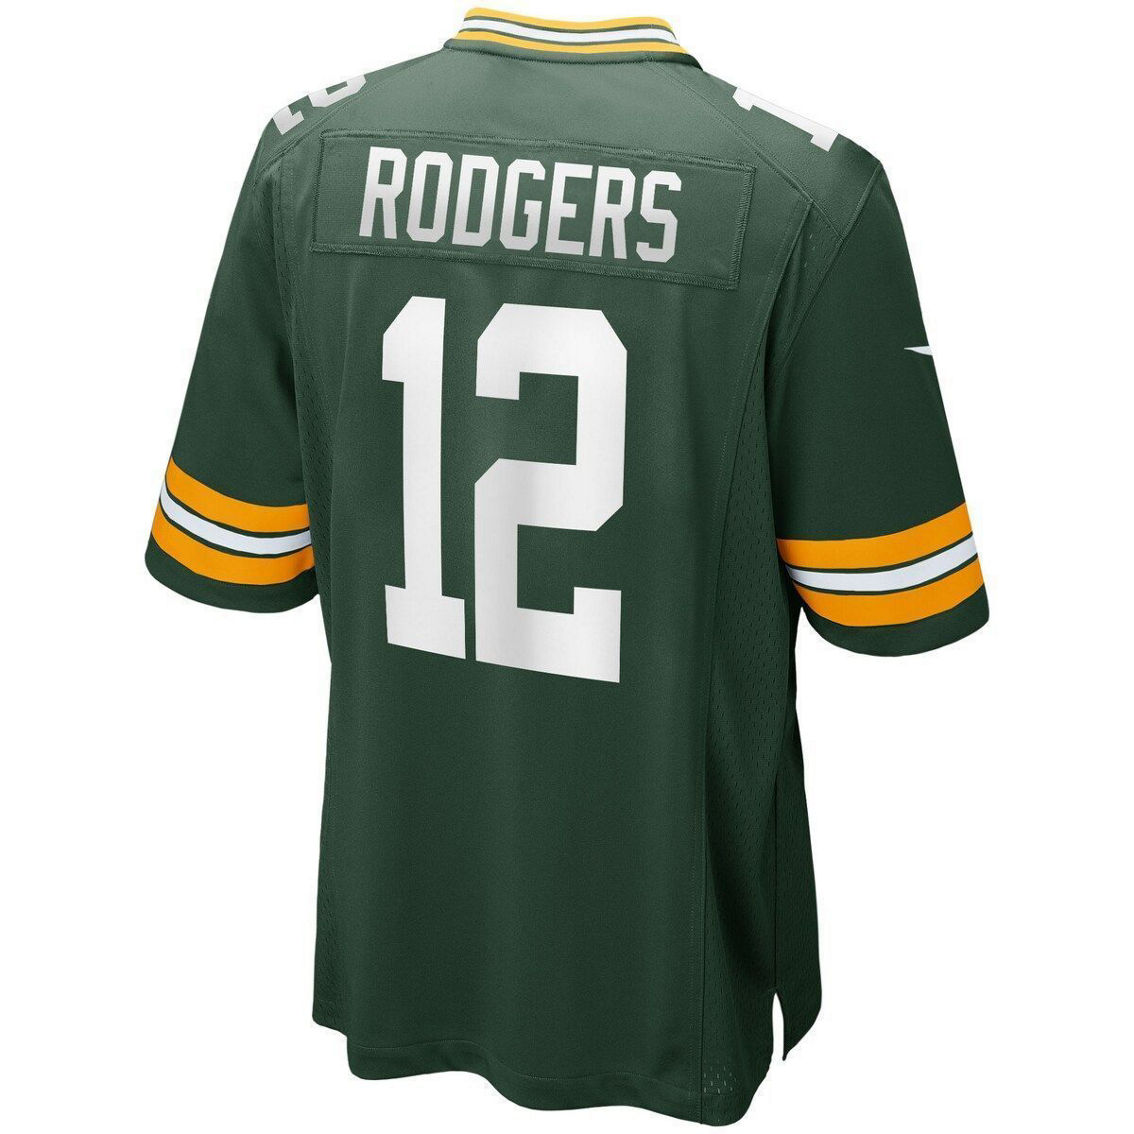 Nike Men's Green Bay Packers Aaron Rodgers Green Game Player Jersey - Image 4 of 4